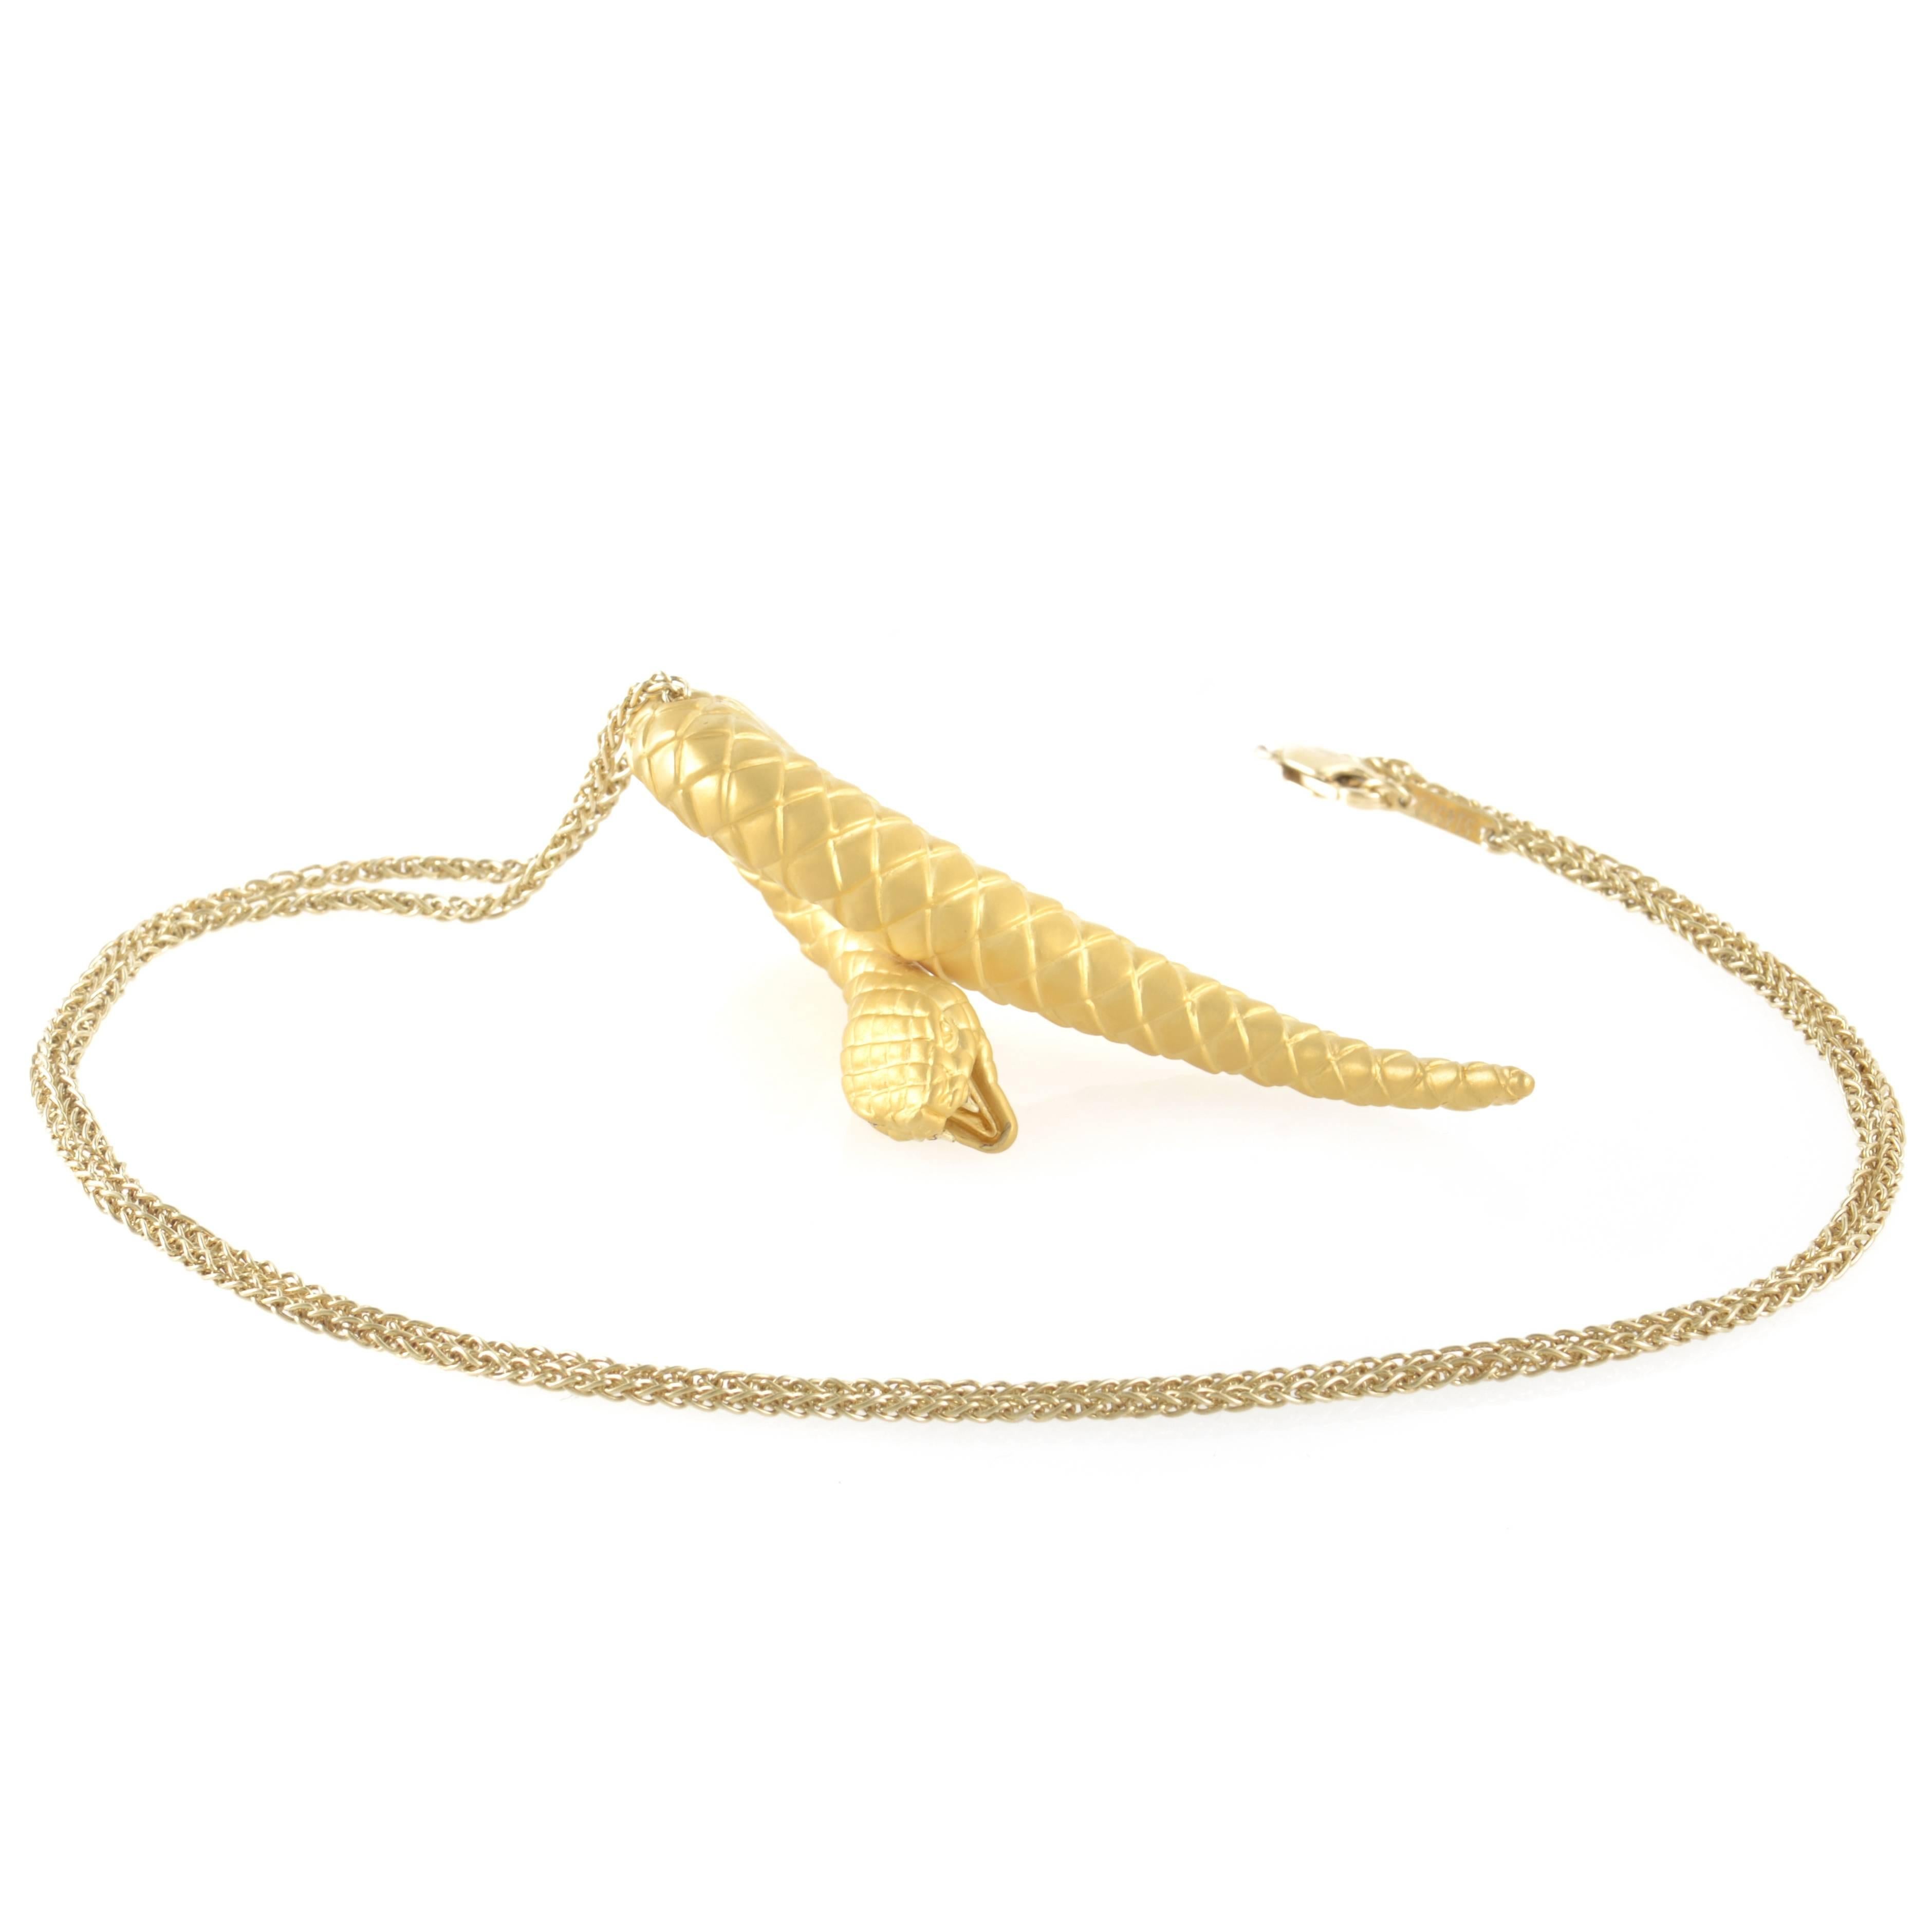 Fiercely majestic, this pendant necklace from Carrera y Carrera is perfect for a daring lady. The necklace is made of 18K yellow gold and features a snake-shaped pendant also made of the same precious material.